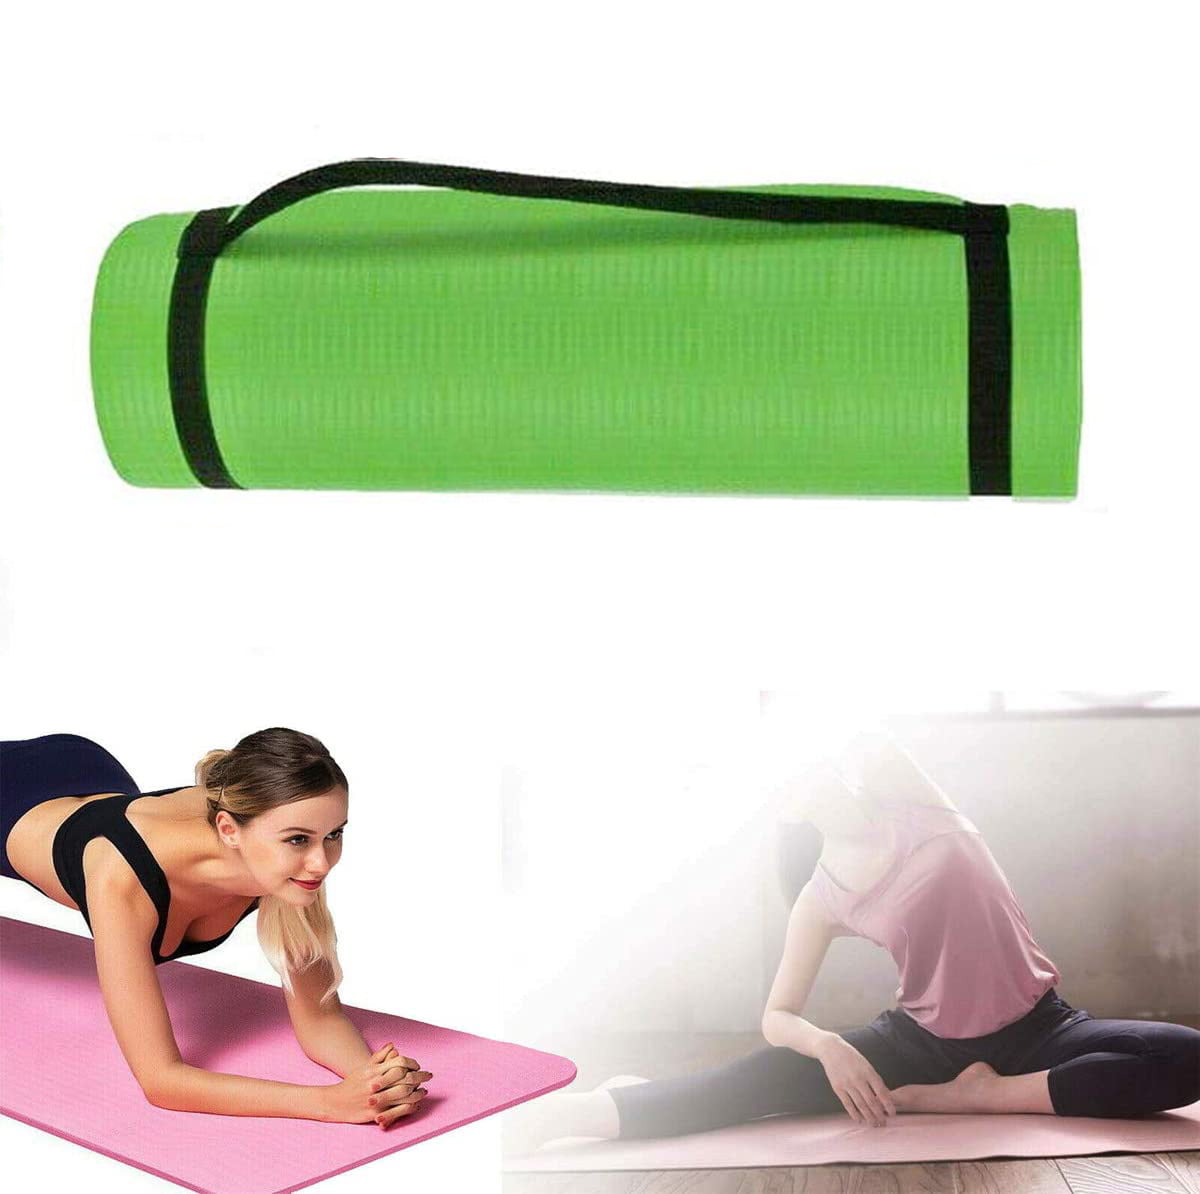 Exercise Yoga Mat Gymnastic 15mm Thick Fitness Training Pilates Free Carry strap 